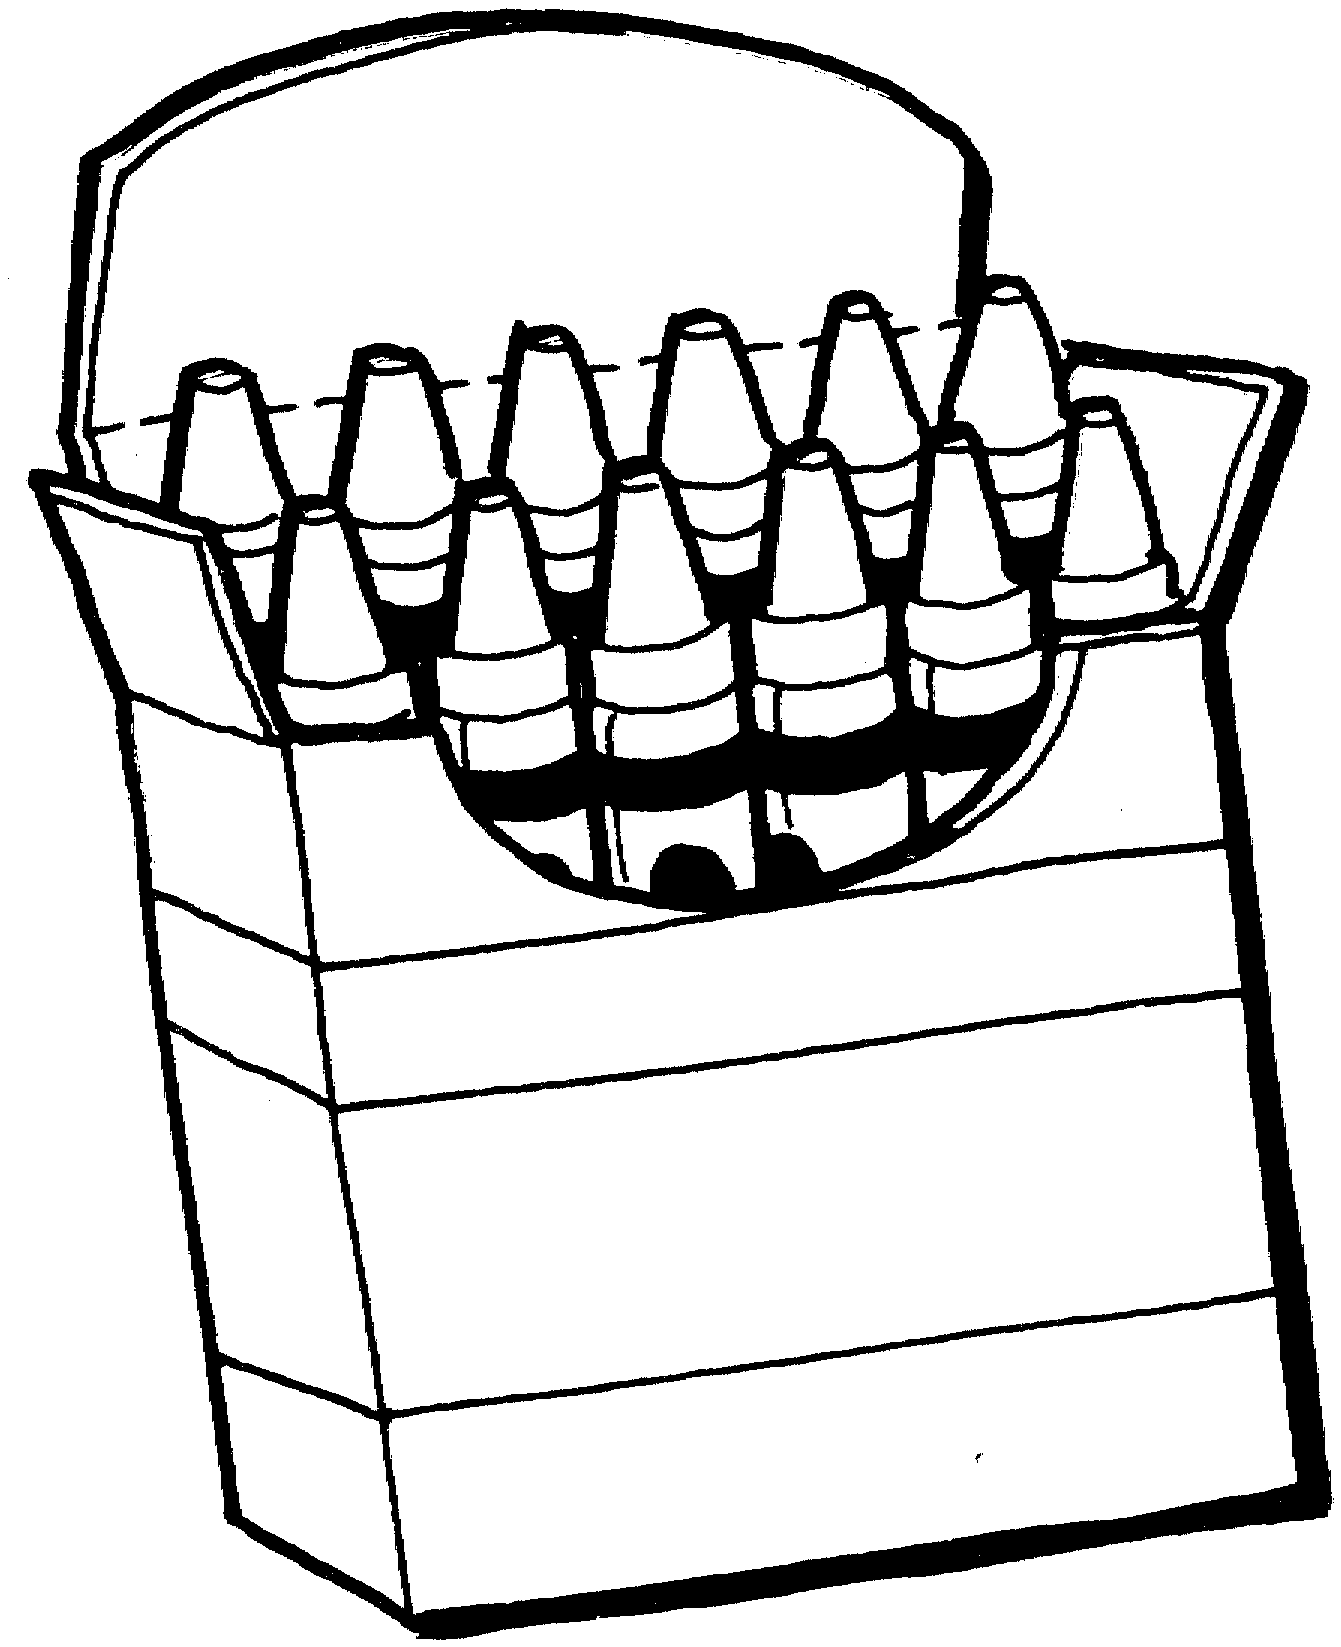 Free Crayons Cliparts Stencil, Download Free Clip Art, Free Clip Art on